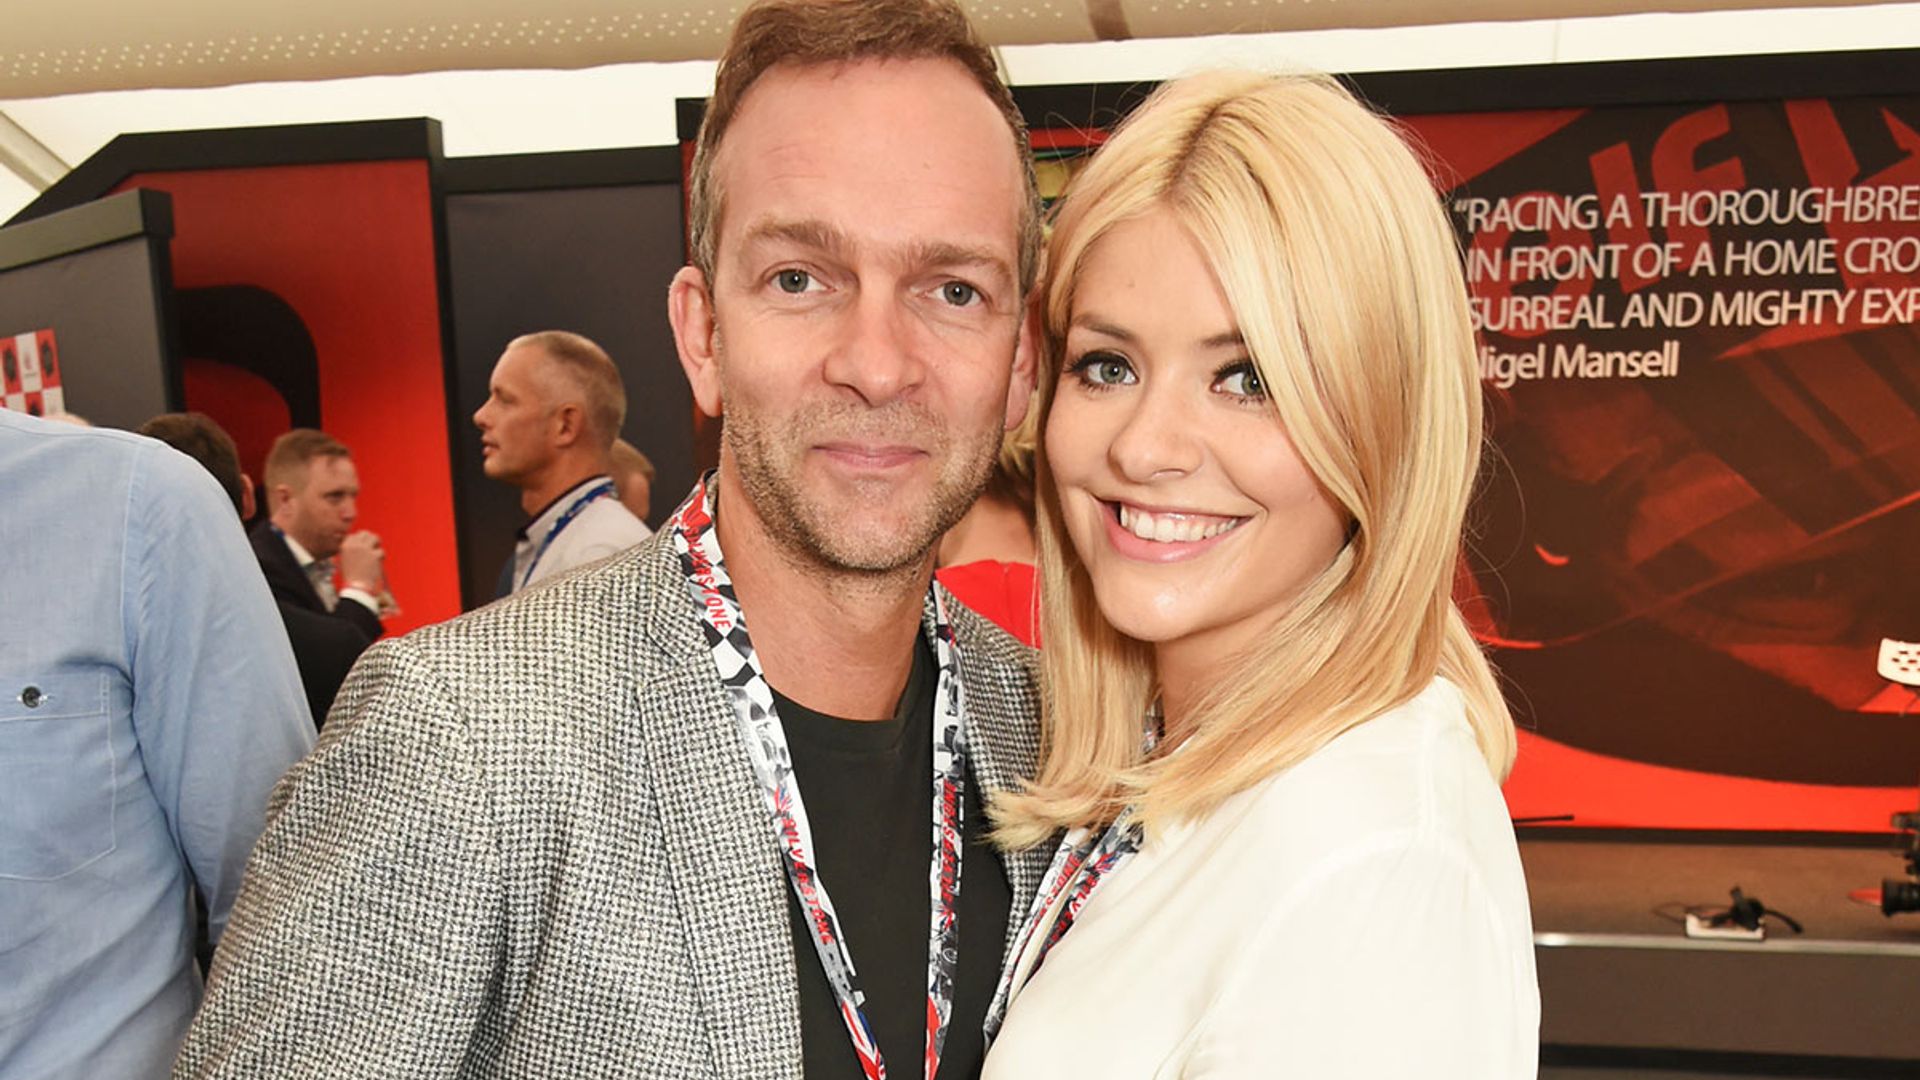 Holly Willoughby's close relationship with rarely-seen husband revealed